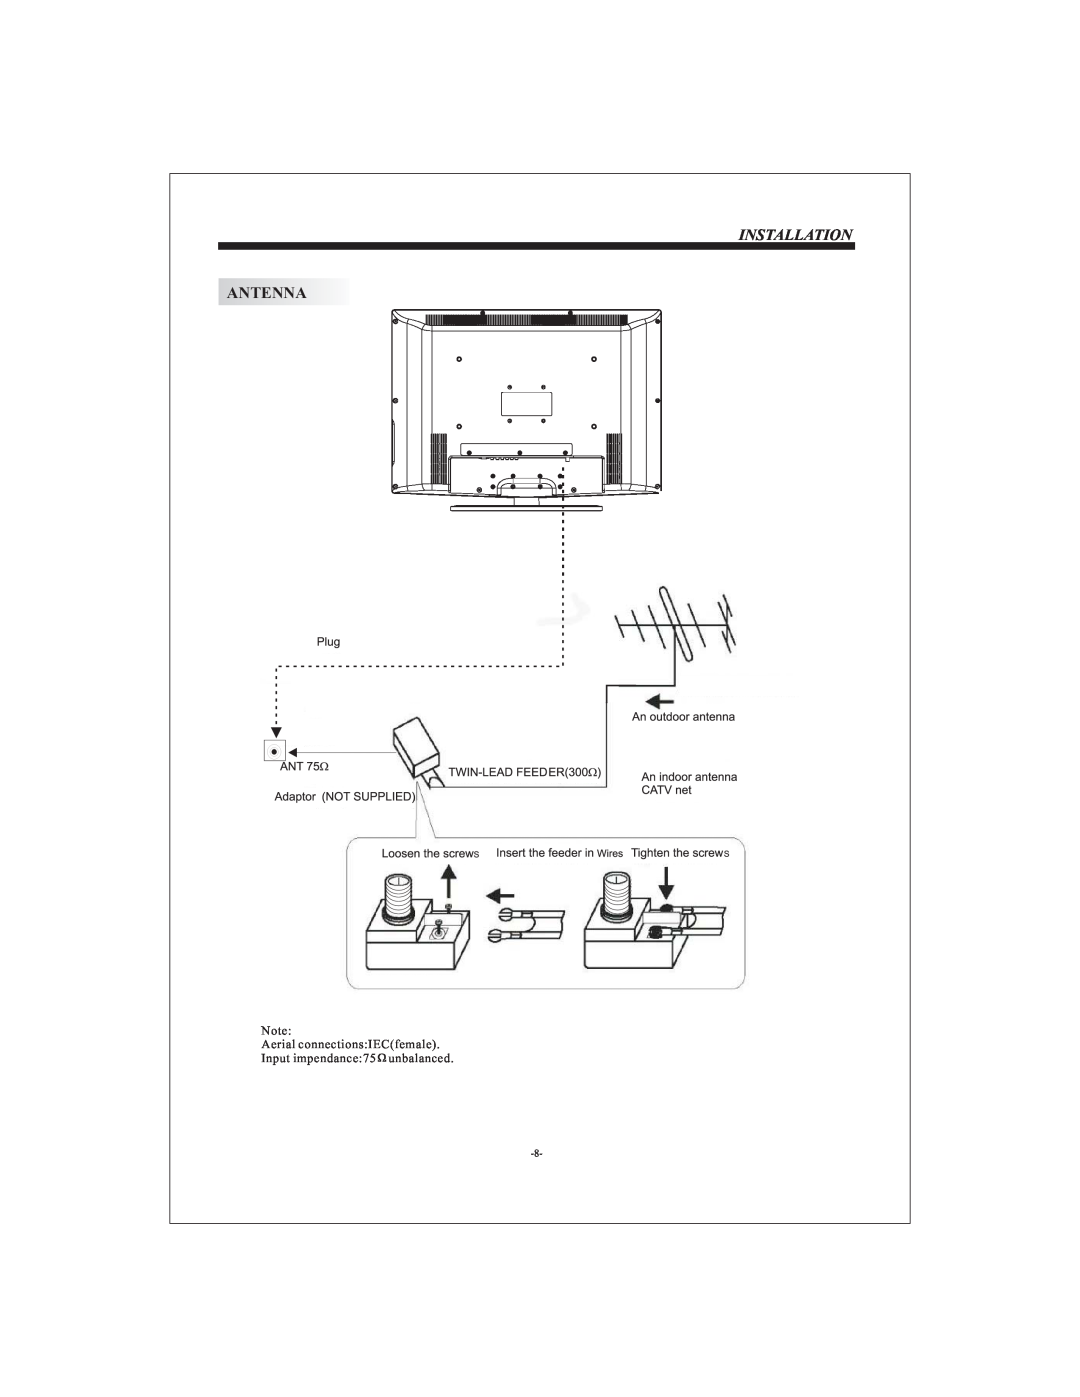 Curtis LCDVD3202A user manual Antenna, Installation, Aerial connectionsIECfemale, Input impendance75, unbalanced 